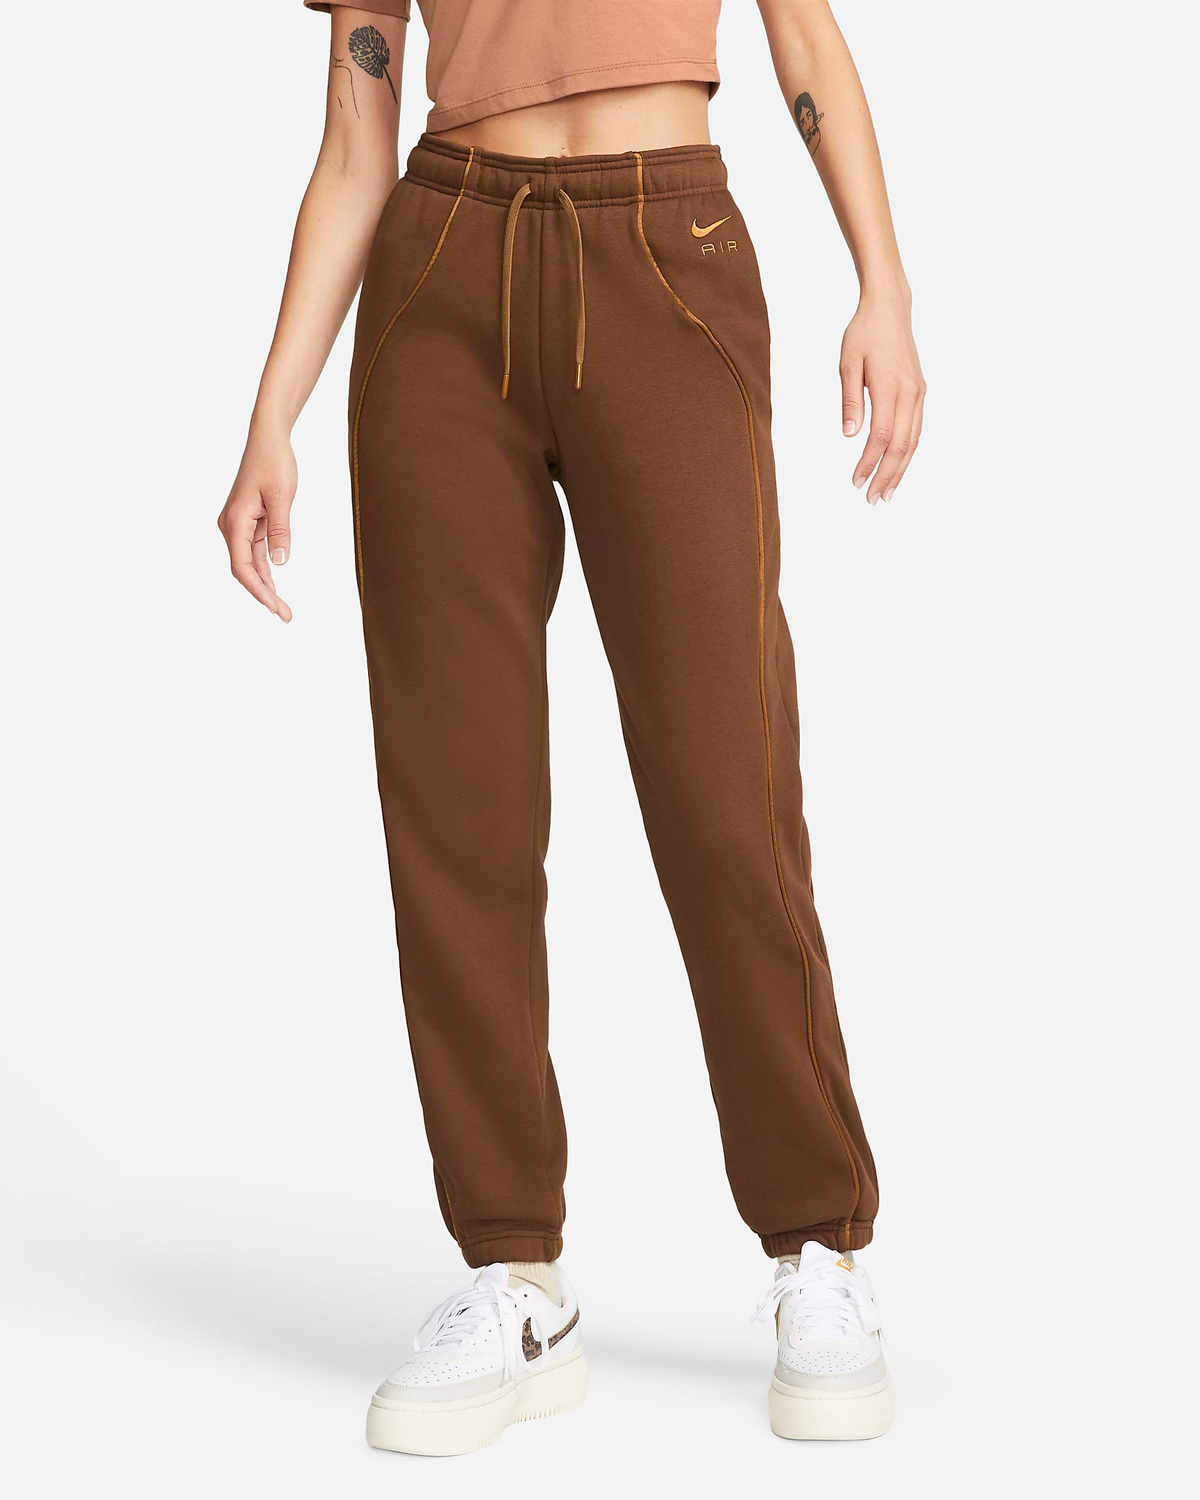 Nike-Air-Womens-Joggers-Cacao-Wow-1